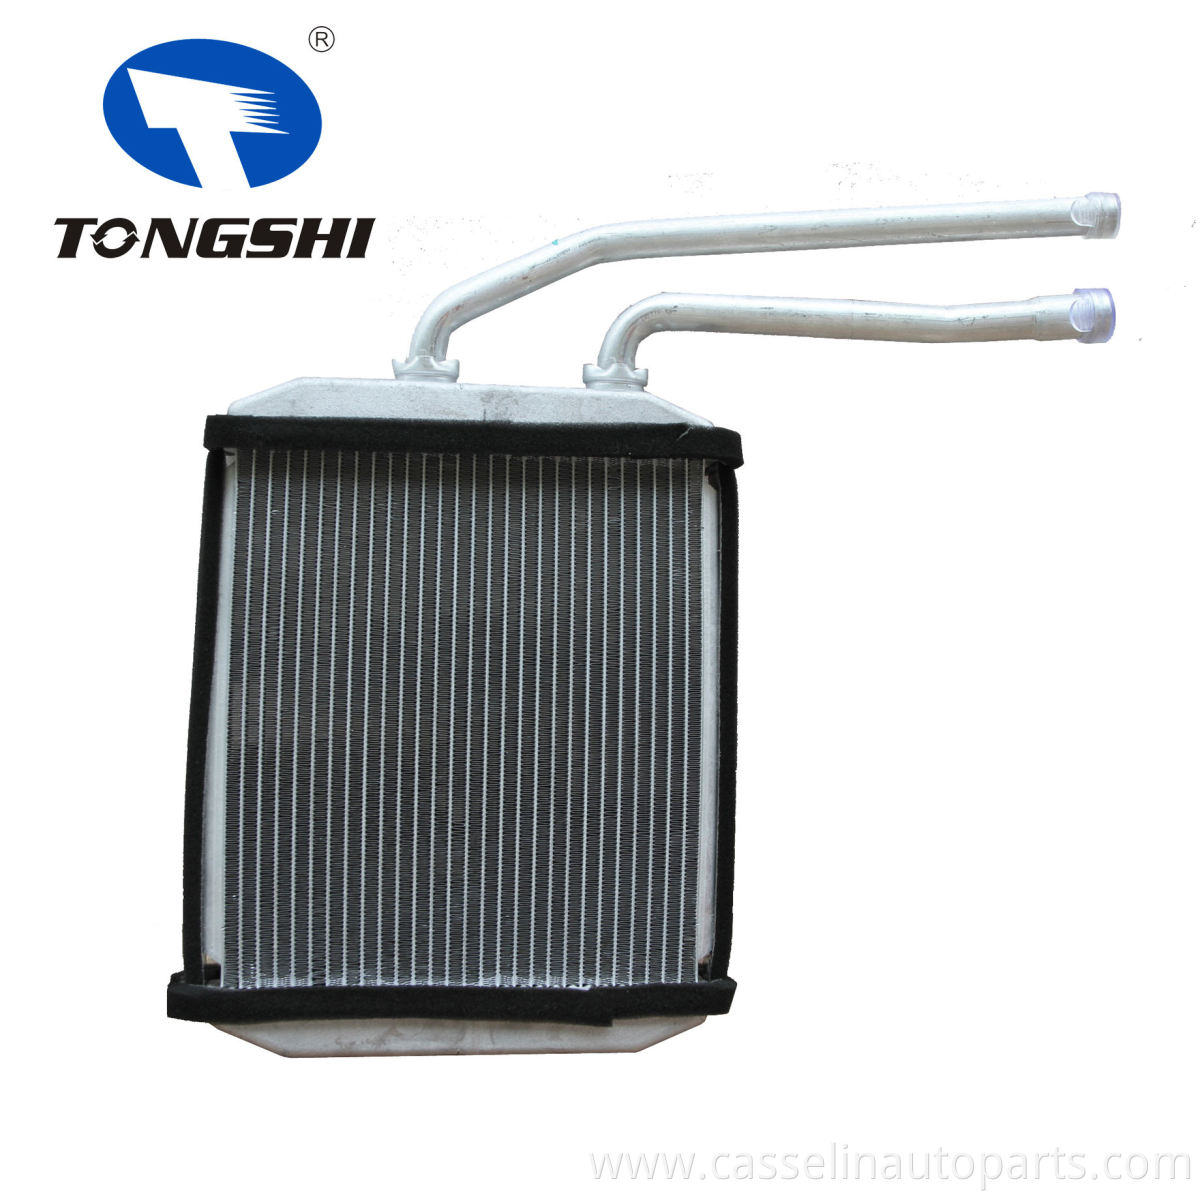 High Quality Car aluminum heater core for 2001-02 GMTRKC350HDCHASSIS OEM 52452915